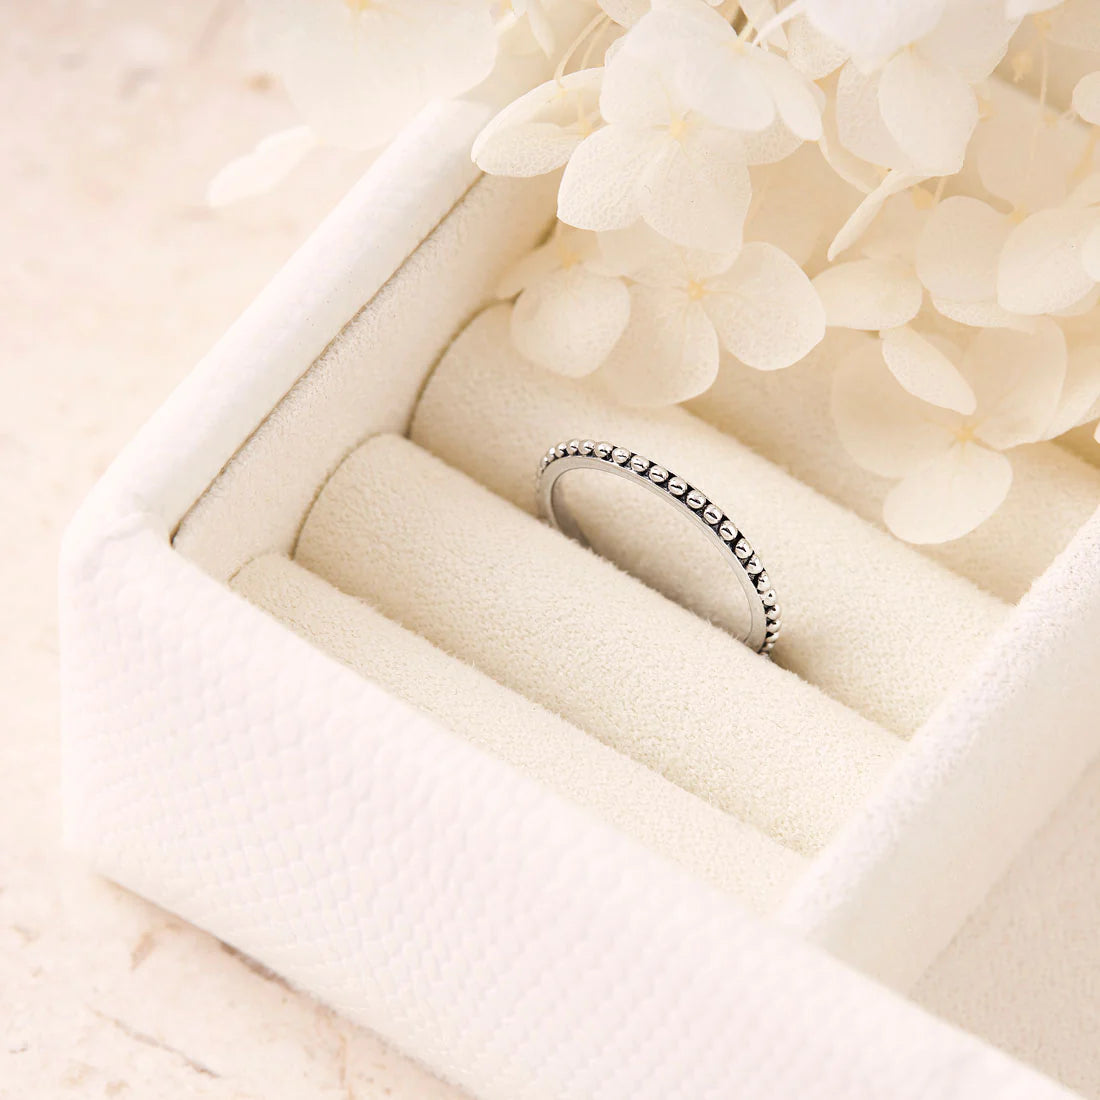 Beaded Stacker Ring - Silver